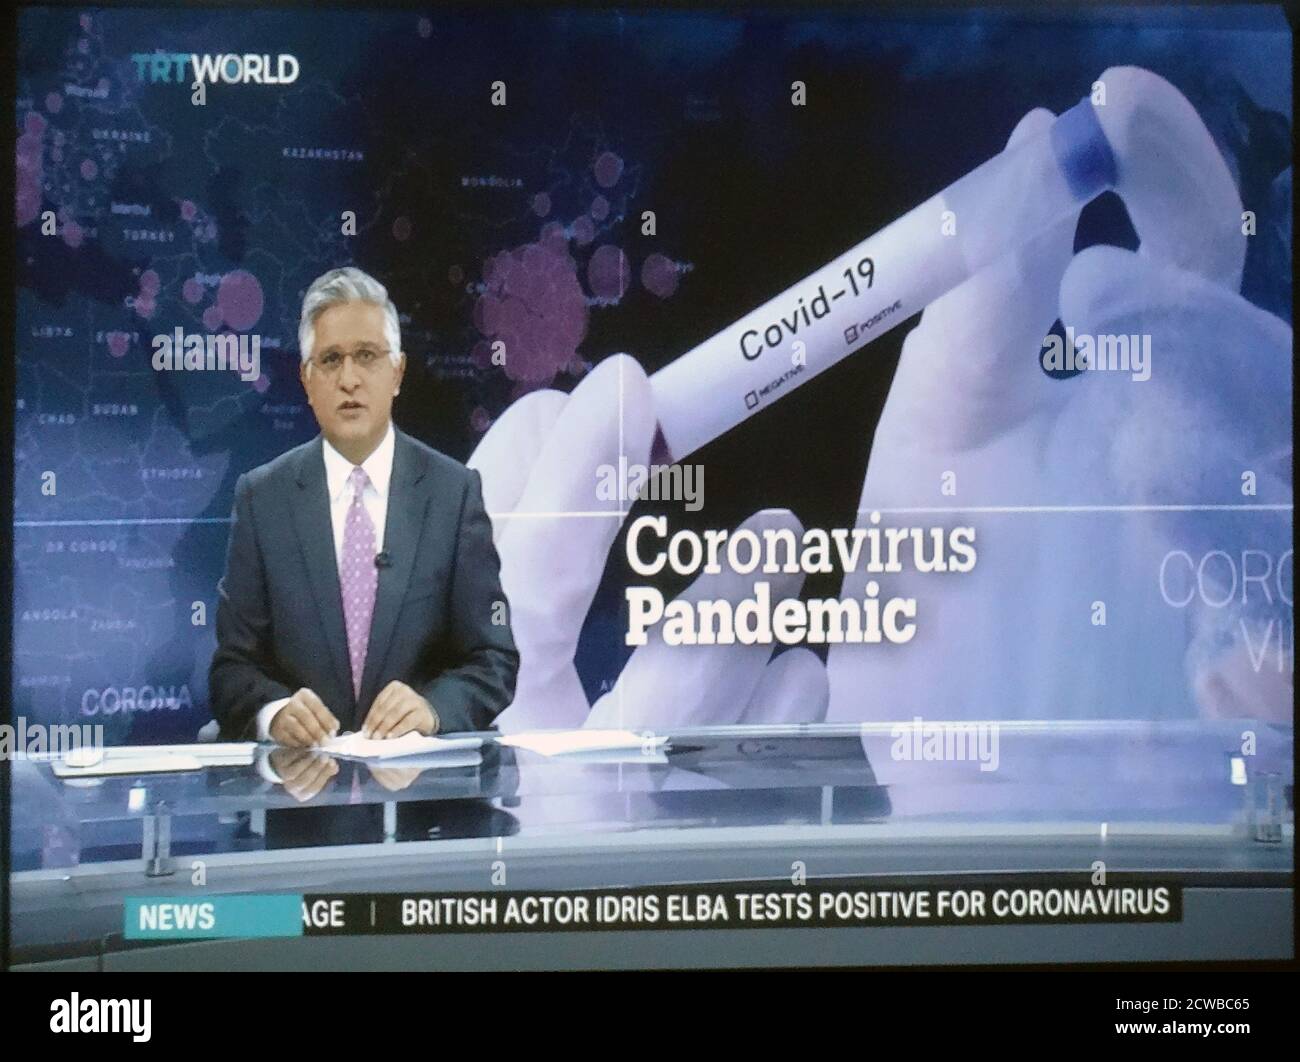 Turkish television report on the Corona Virus Pandemic. March 2020 Stock Photo